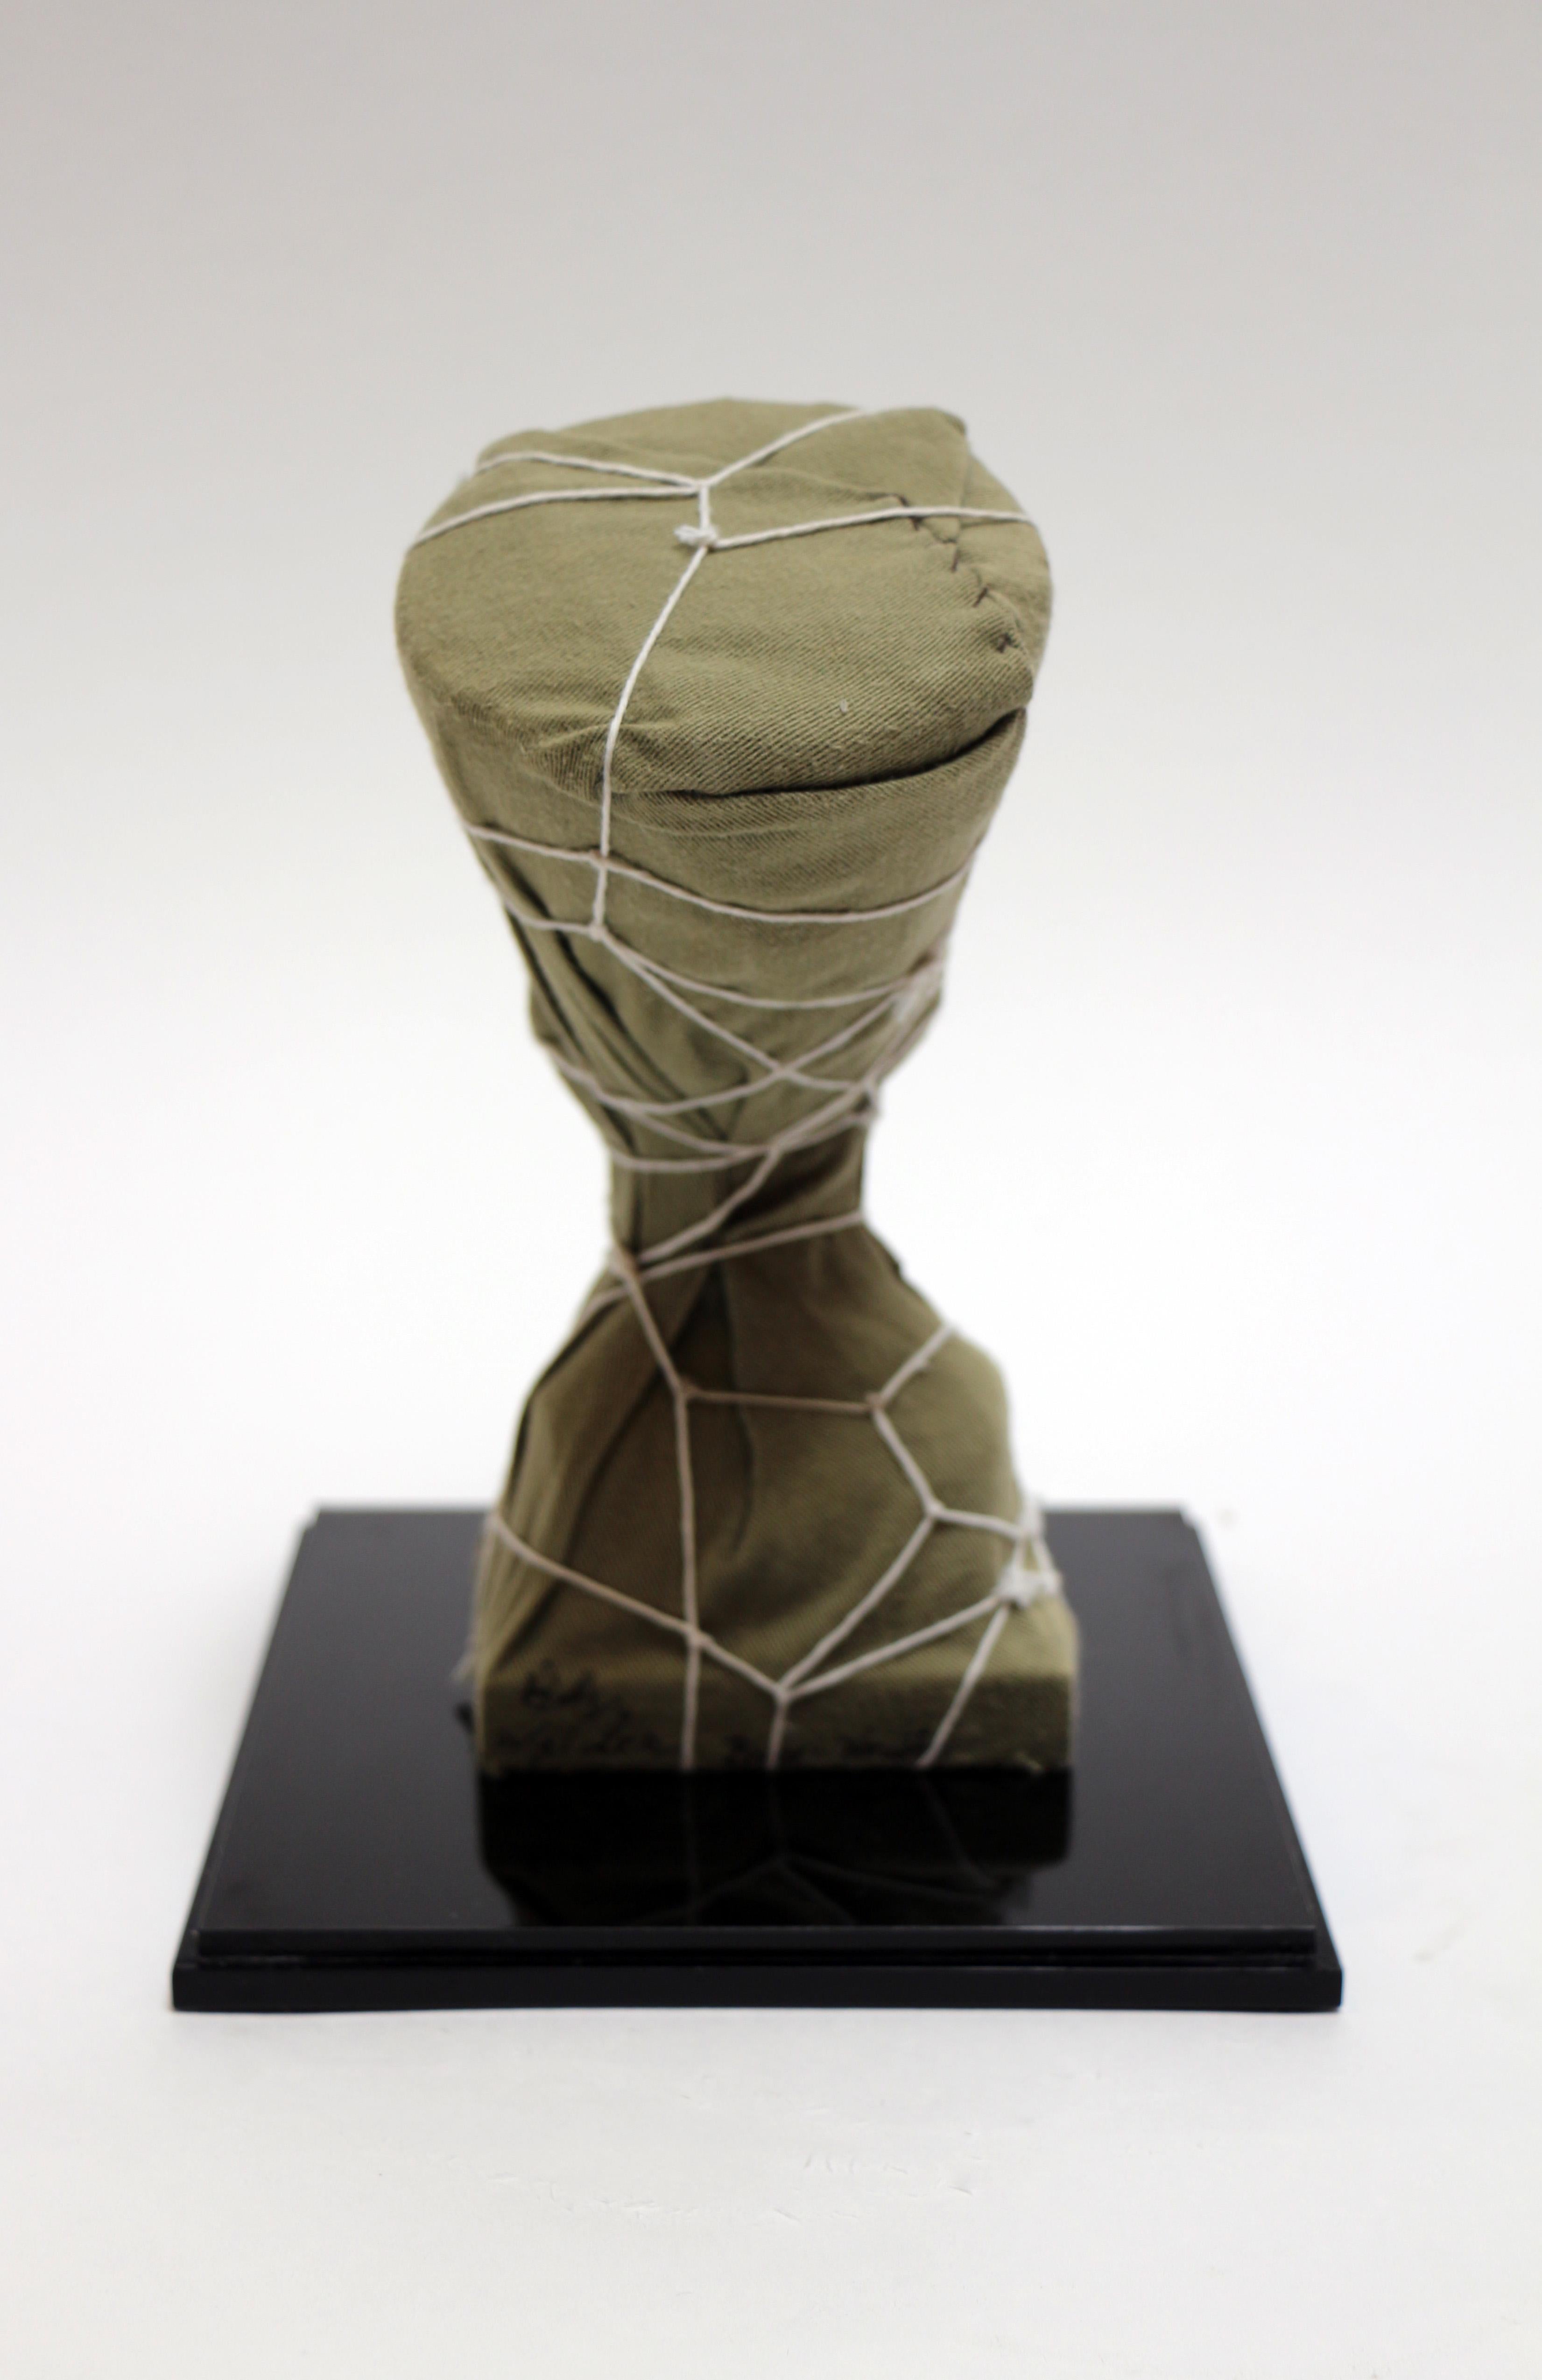 This statue is a depiction of Nefertete in Christo themed attire with an army green cloth covering the entirety of the statue and tied with string. The work is a collaboration between artists Billy Wilder and Bruce Houston. 

Billy Wilder